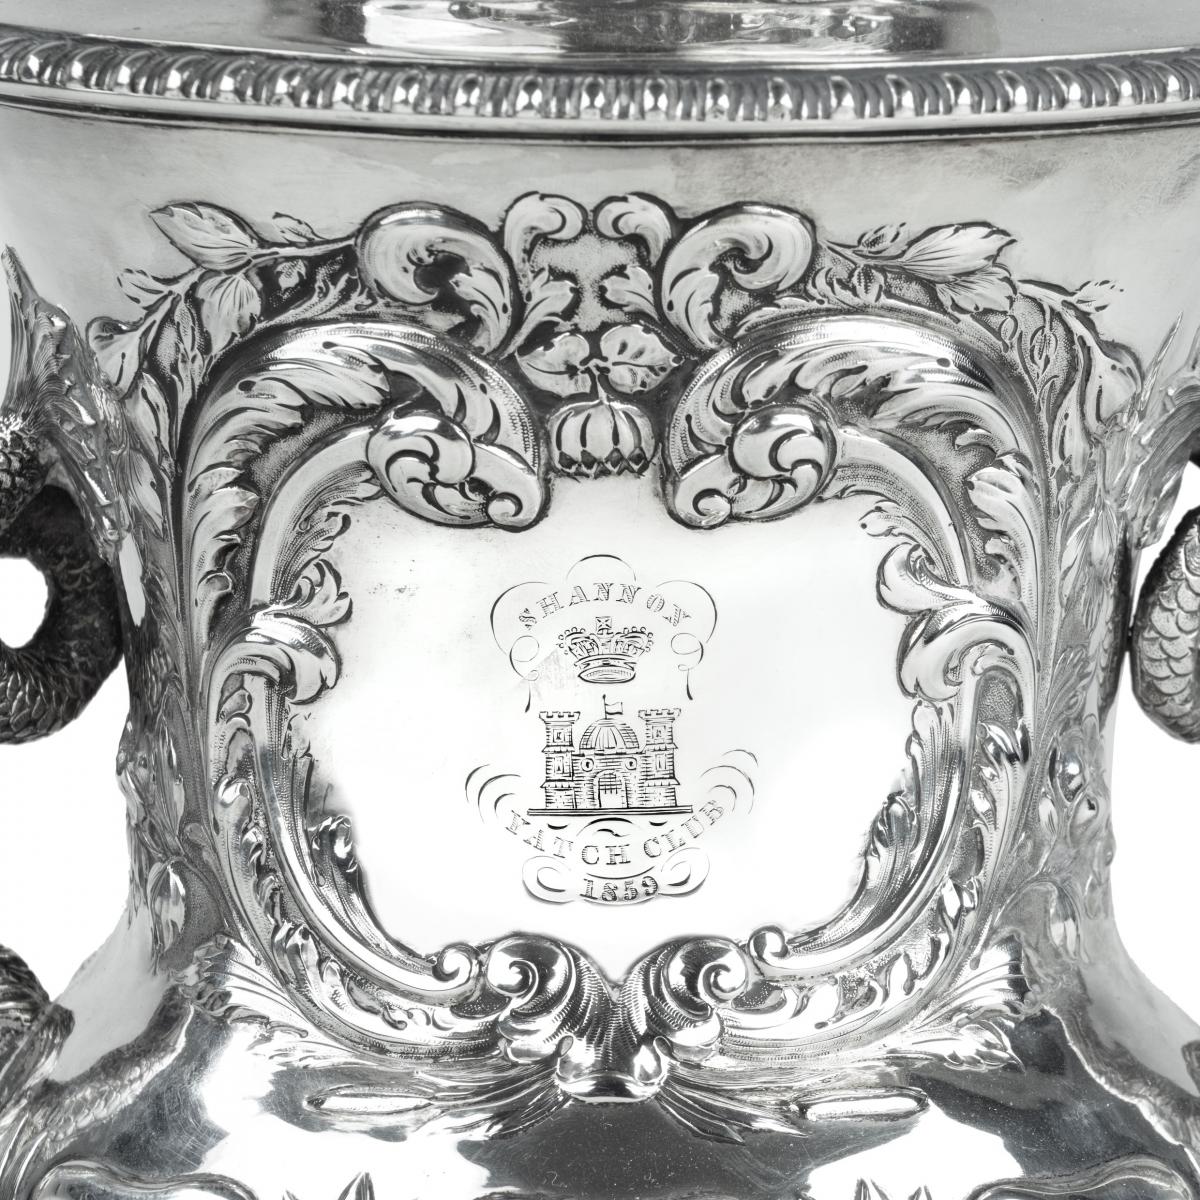 The Shannon Yacht Club silver racing trophy for 1859